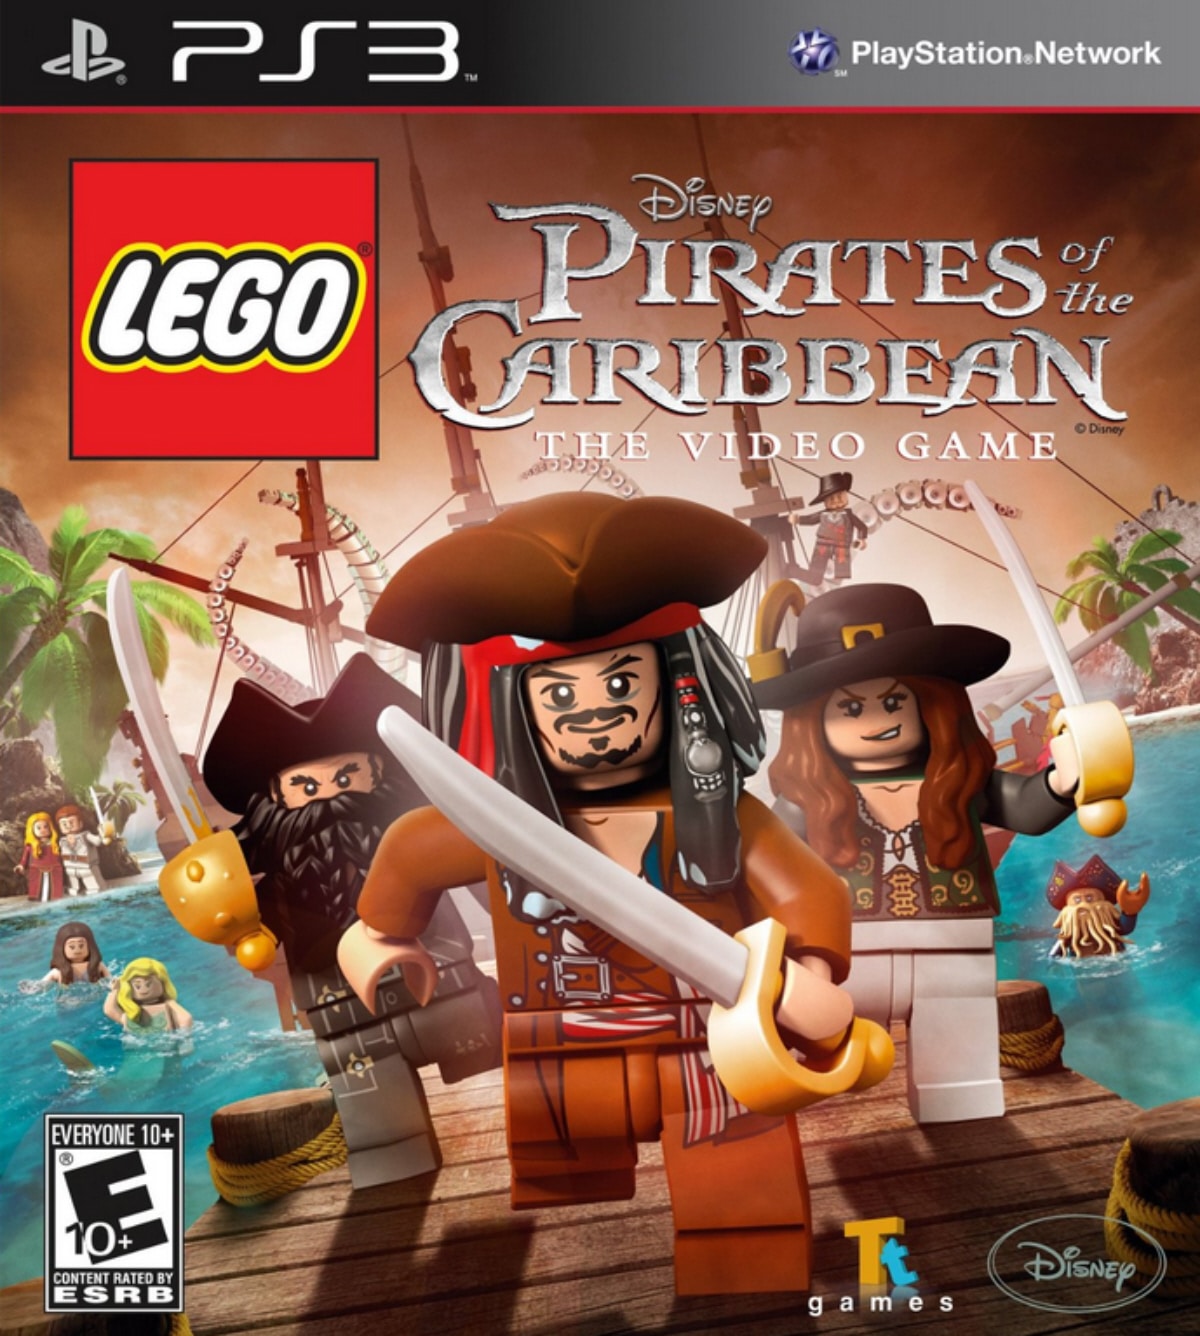 Lego Pirates of Caribbean Walkthrough Guide (Wii, PC, PS3, Xbox 360) - Video Games